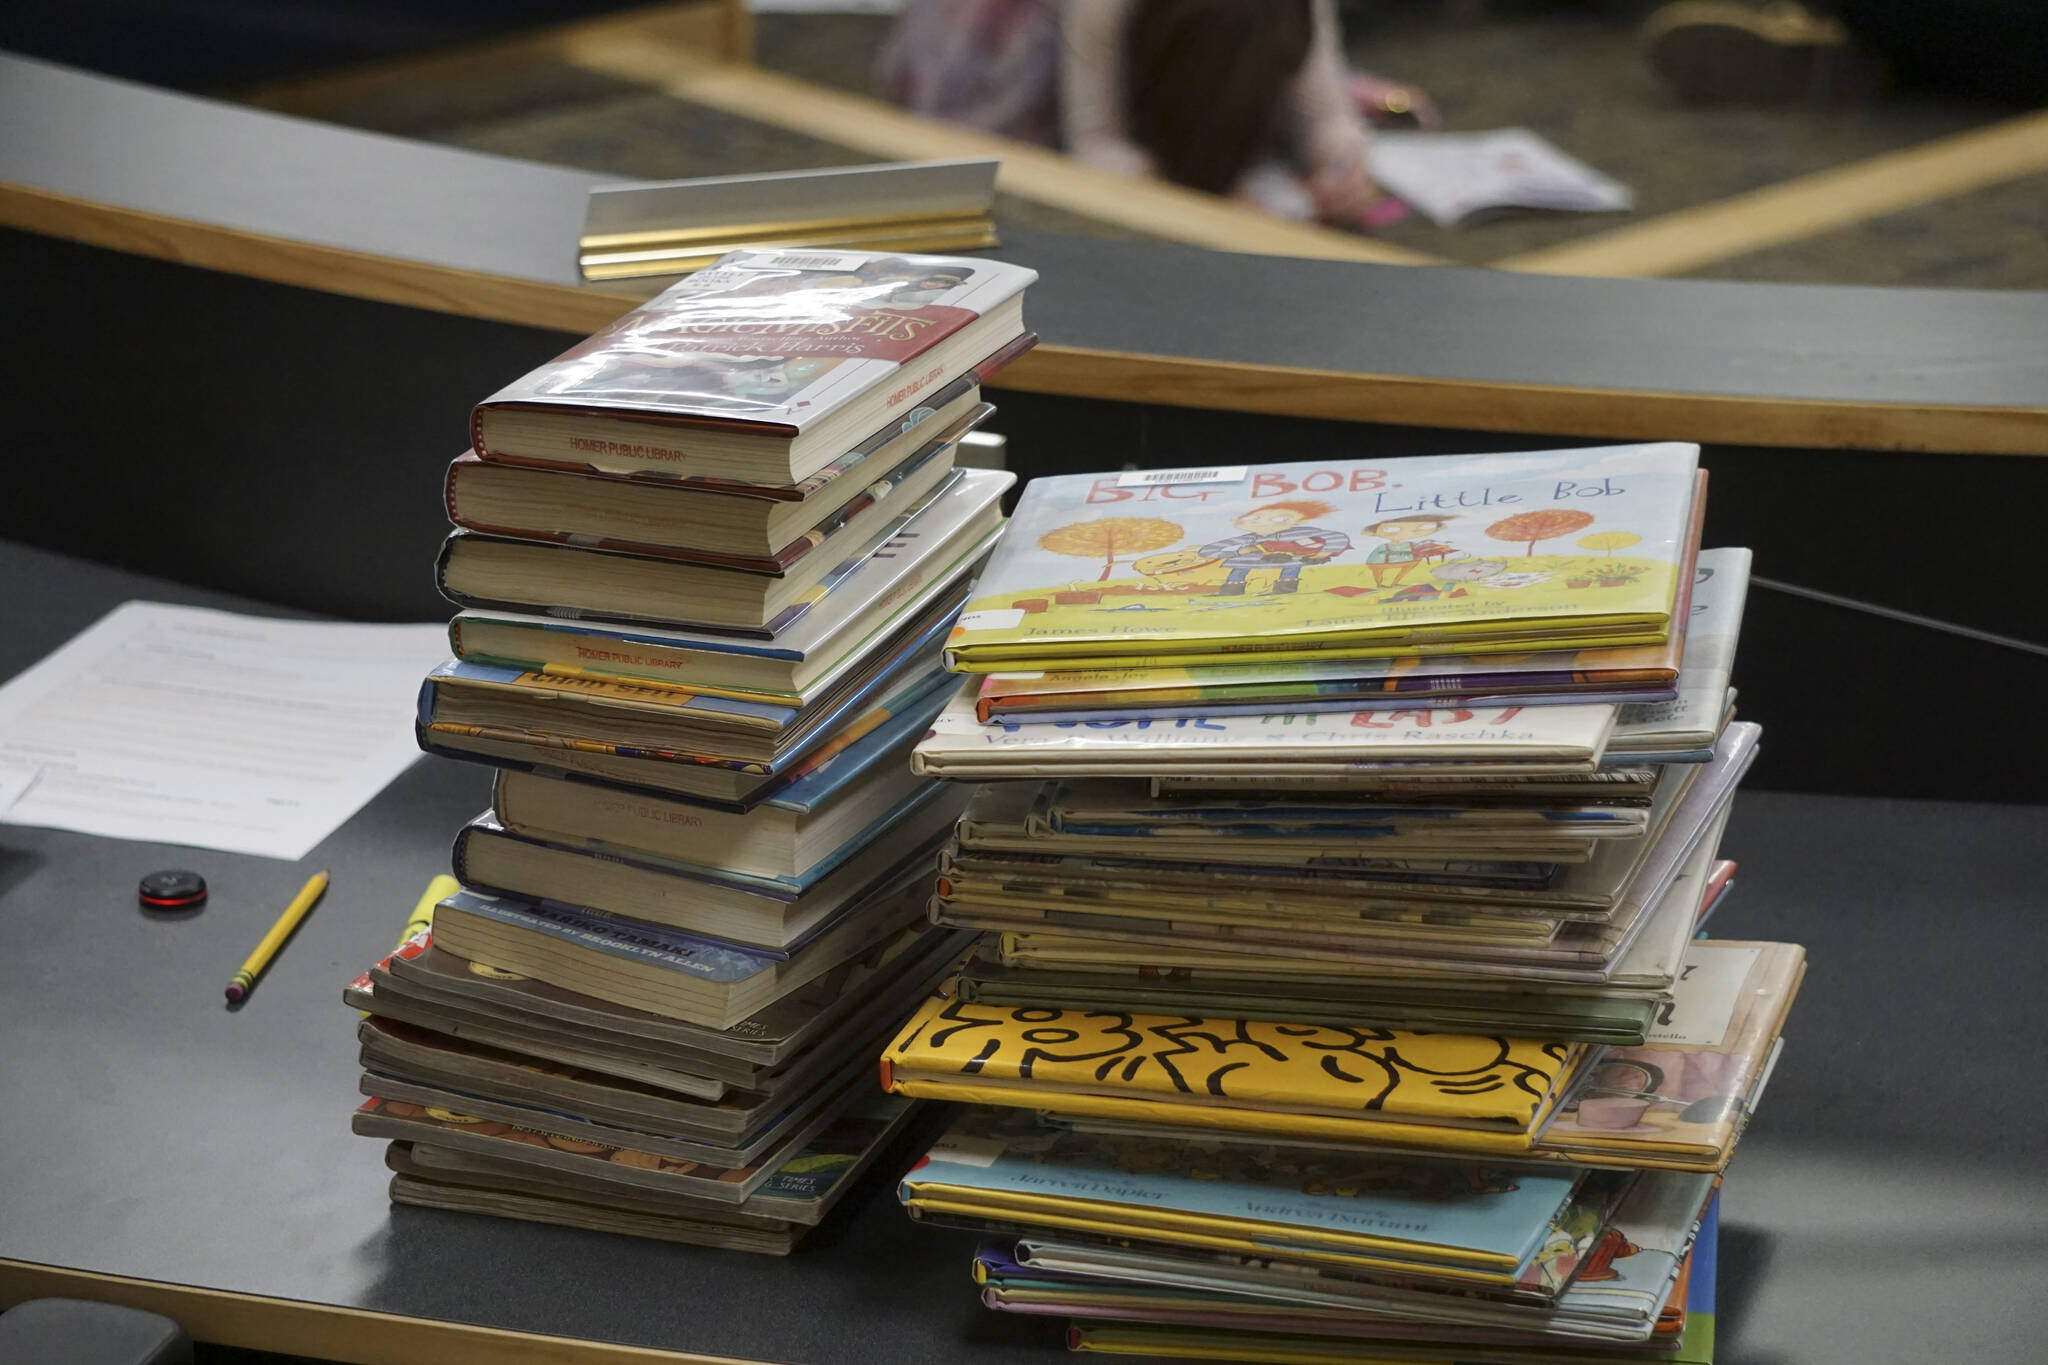 Some of the Homer Public Library books a citizens group has asked be removed from the children’s section lie on a table at the meeting of the Library Advisory Board on Nov. 15, 2022, in the Cowles Council Chambers at Homer City Hall in Homer, Alaska. (Photo by Michael Armstrong/Homer News)